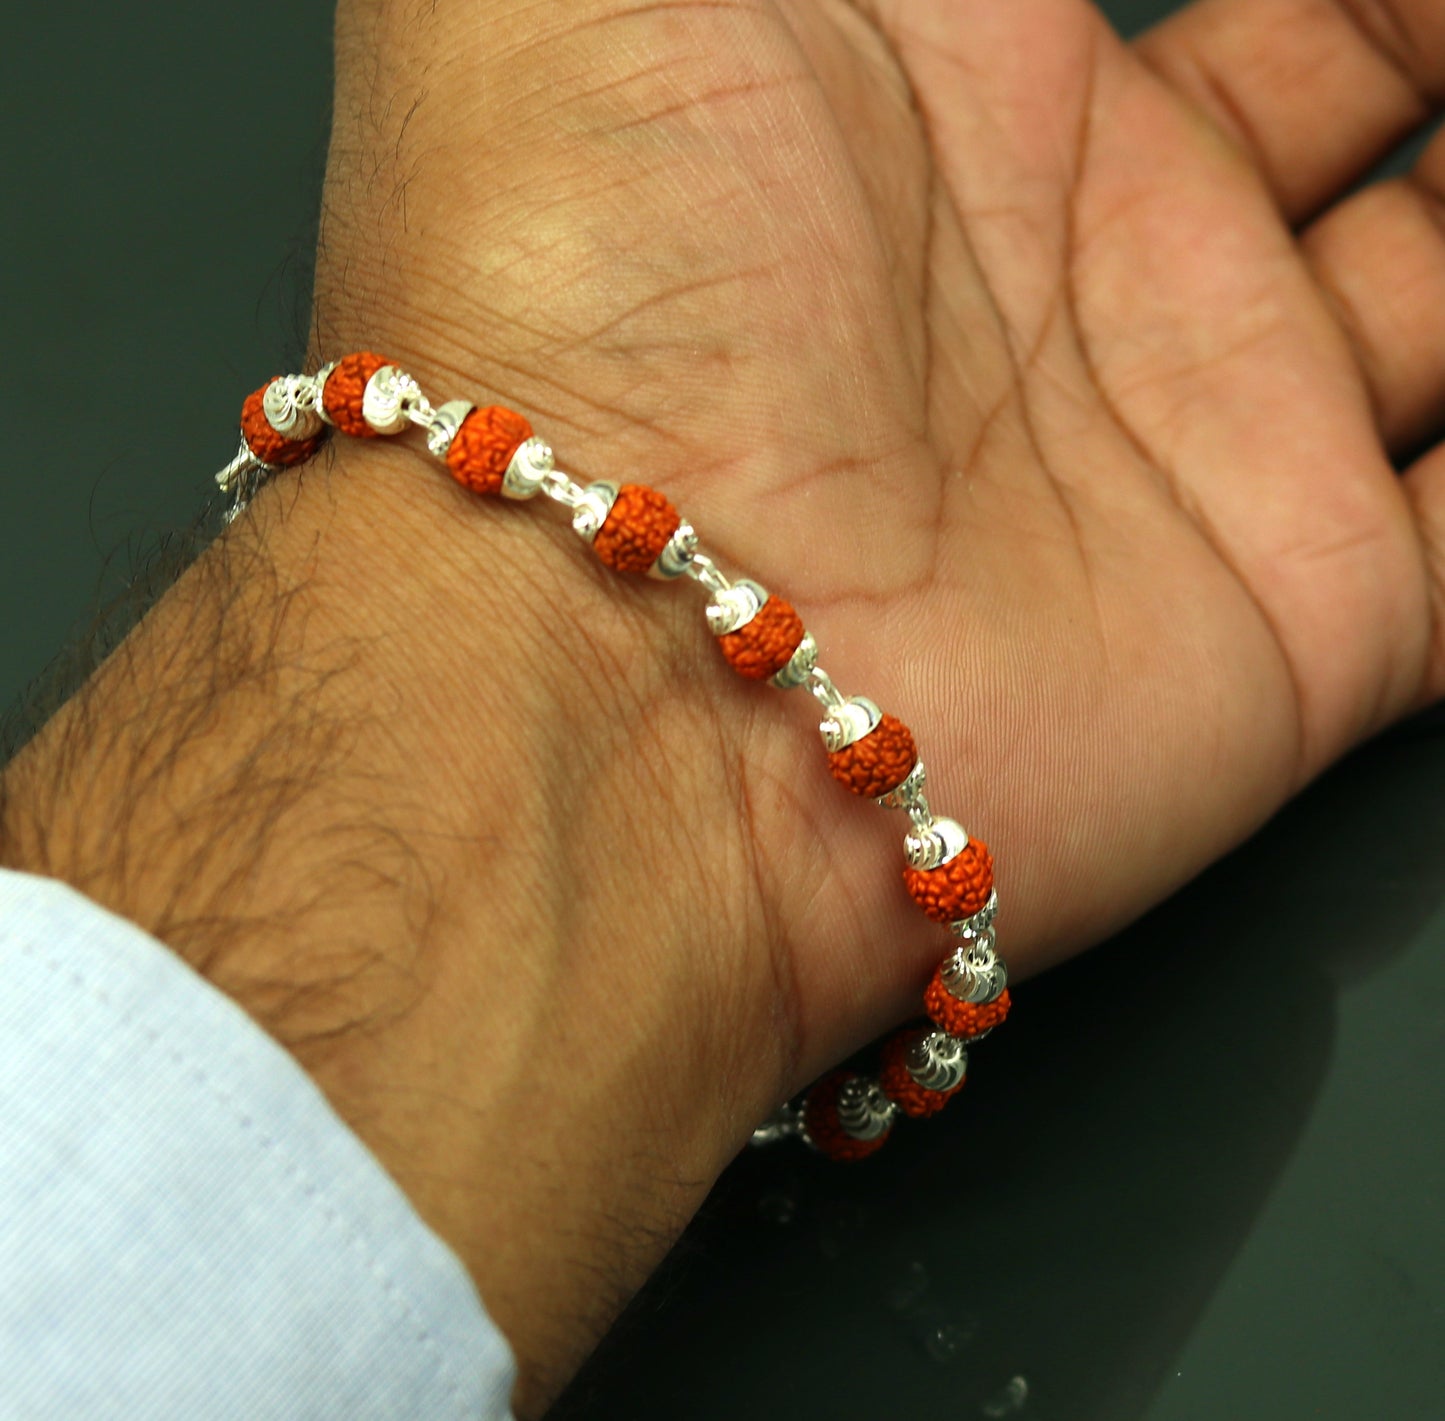 8.2" long handmade gorgeous Rudraksha beads bracelet, excellent customized gifting personalized unisex jewelry from india sbr197 - TRIBAL ORNAMENTS